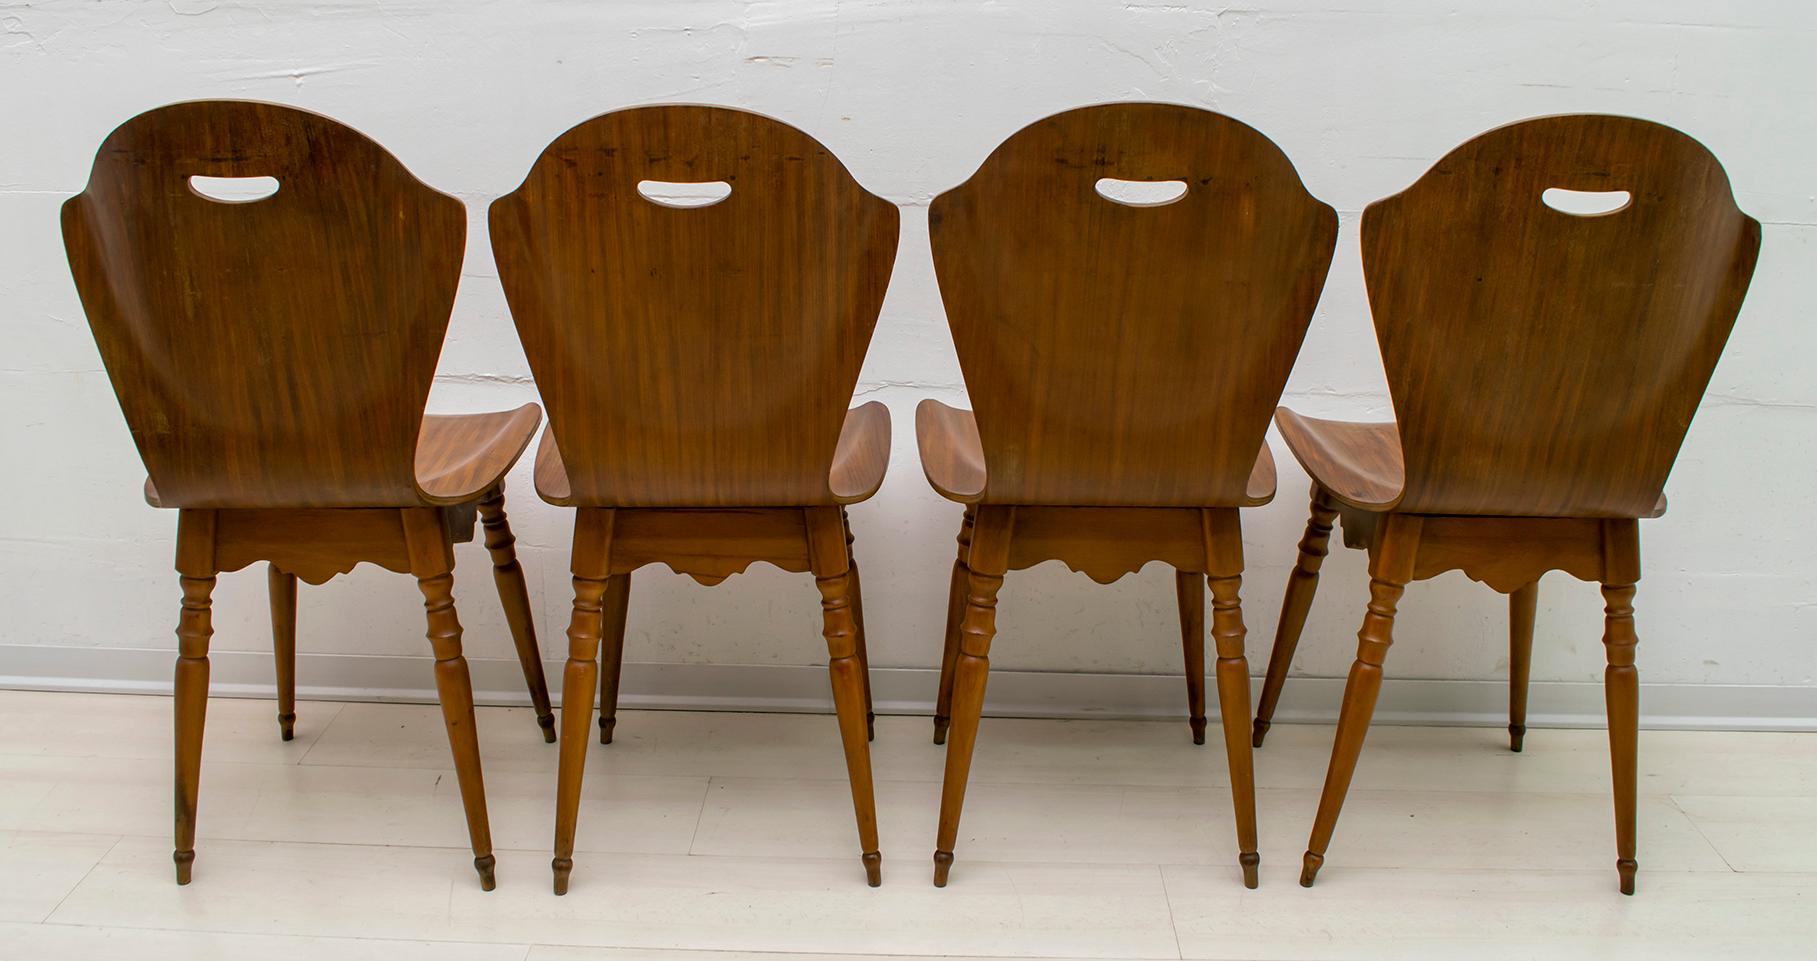 After Carlo Ratti Mid-Century Modern Italian Bentwood Chairs, 1950s For Sale 10